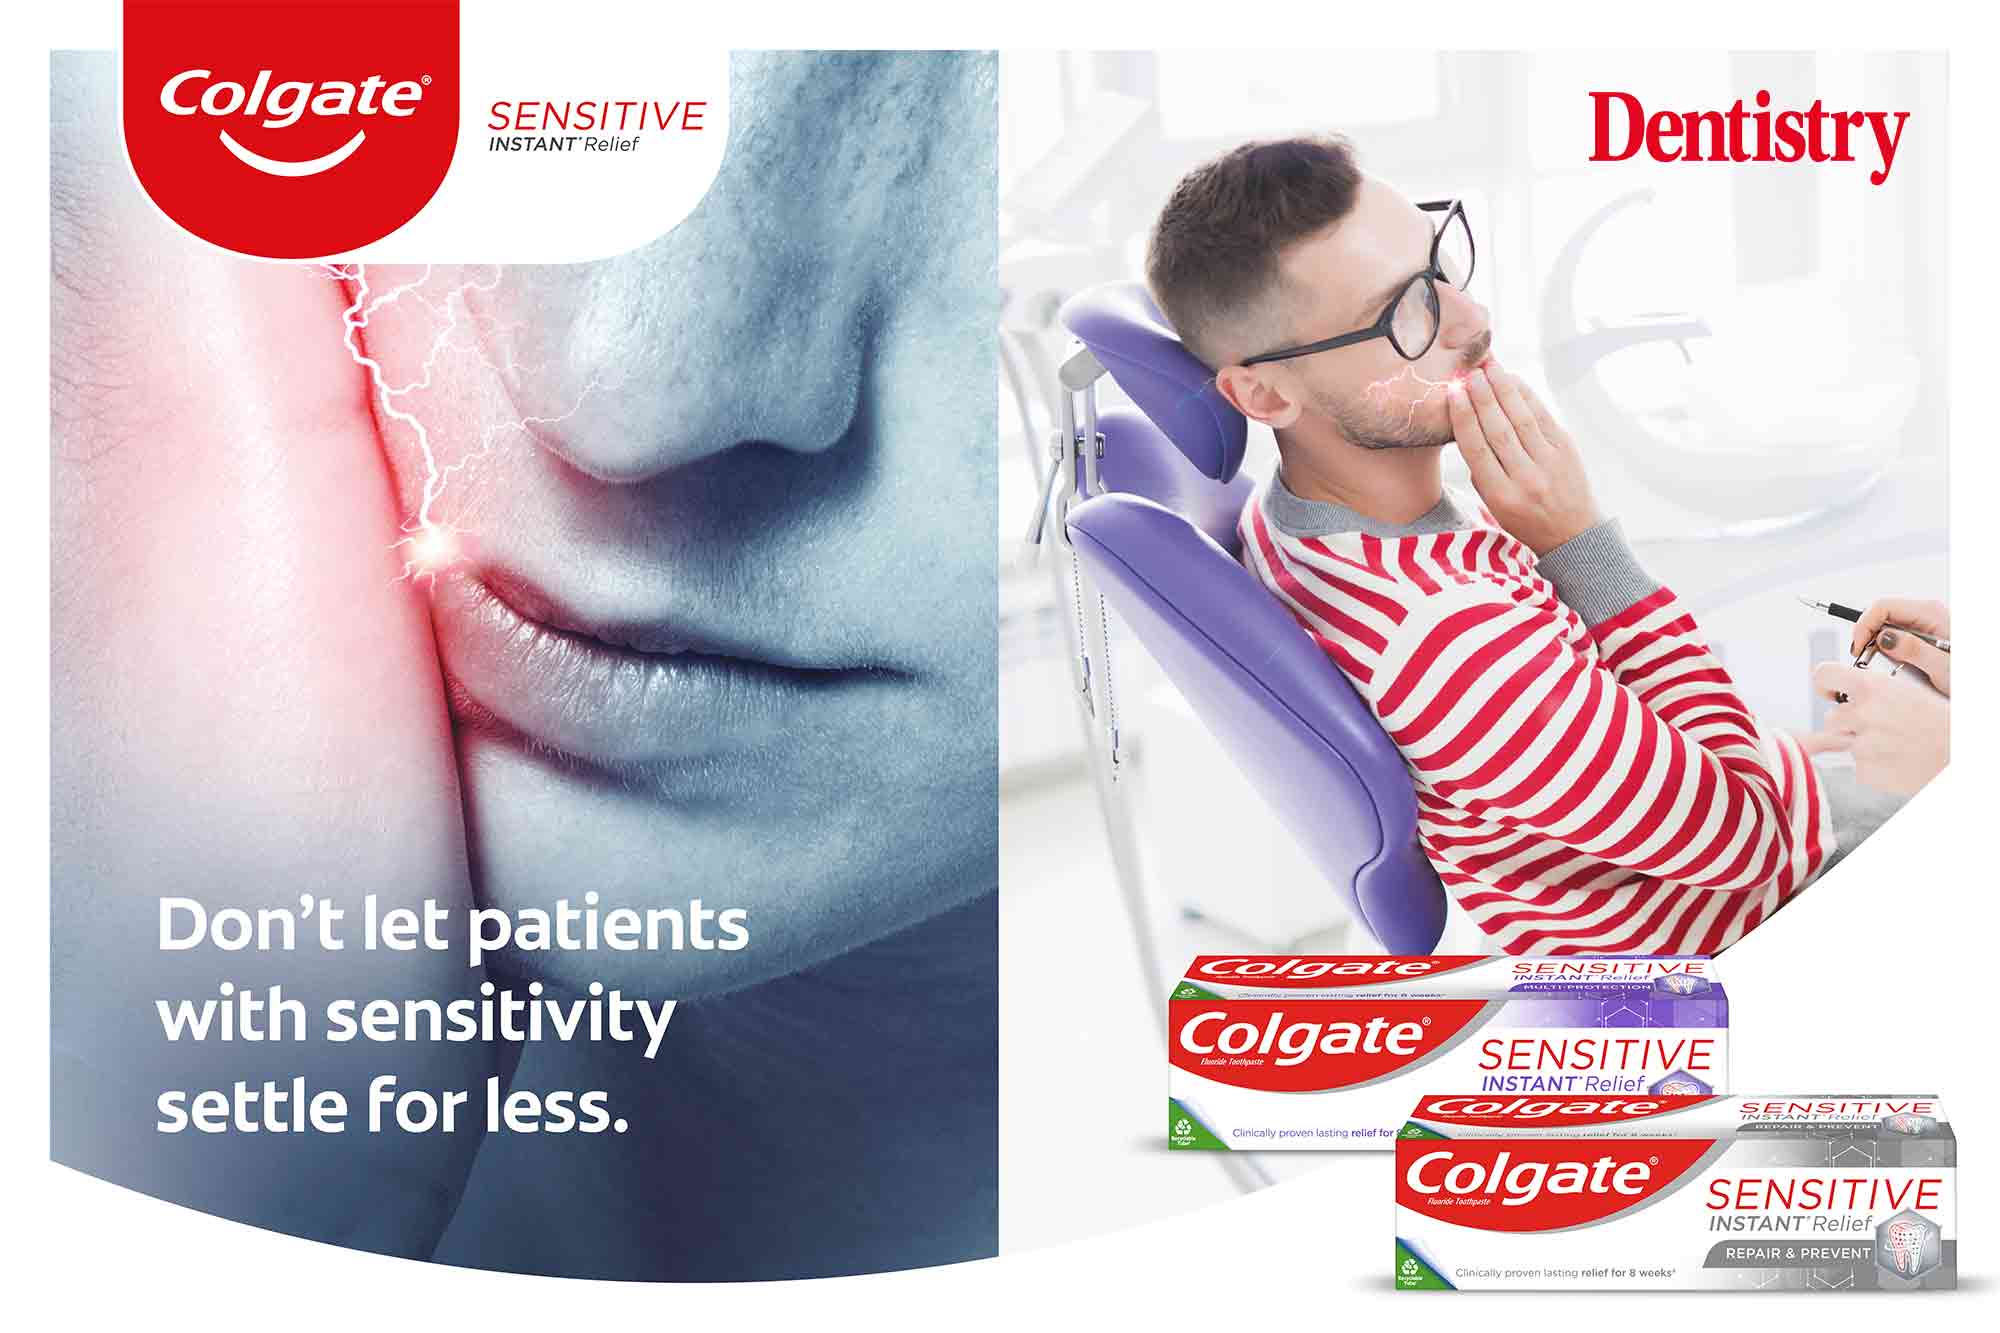 Colgate Sensitive Instant Relief offers instant and long-lasting relief